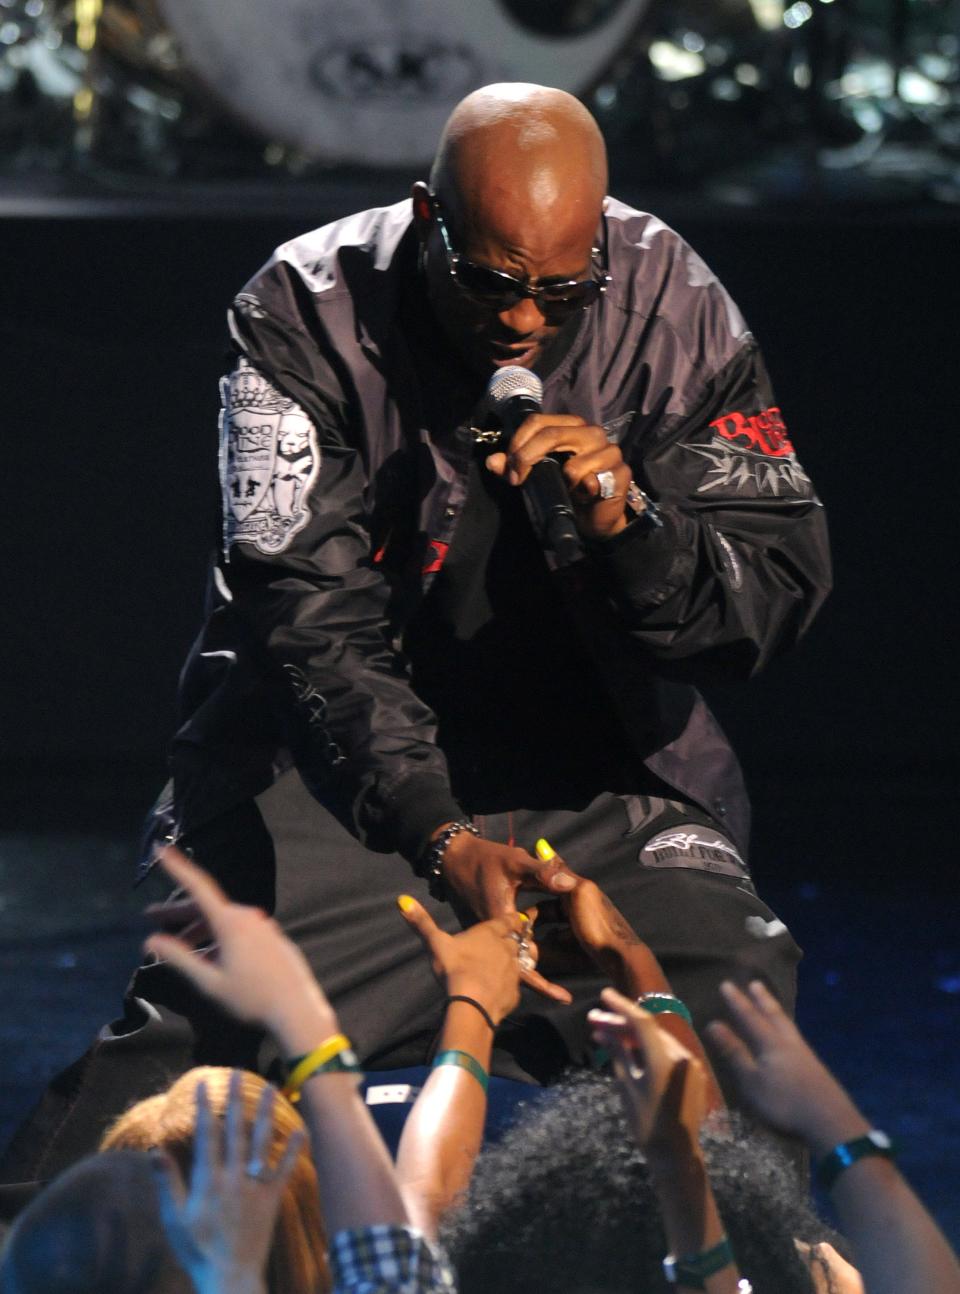 DMX, performing here at the VH1 Hip Hop Honors at the Brooklyn Academy of Music in New York on Sept. 23, 2009, died on April 9, 2021 at 50.